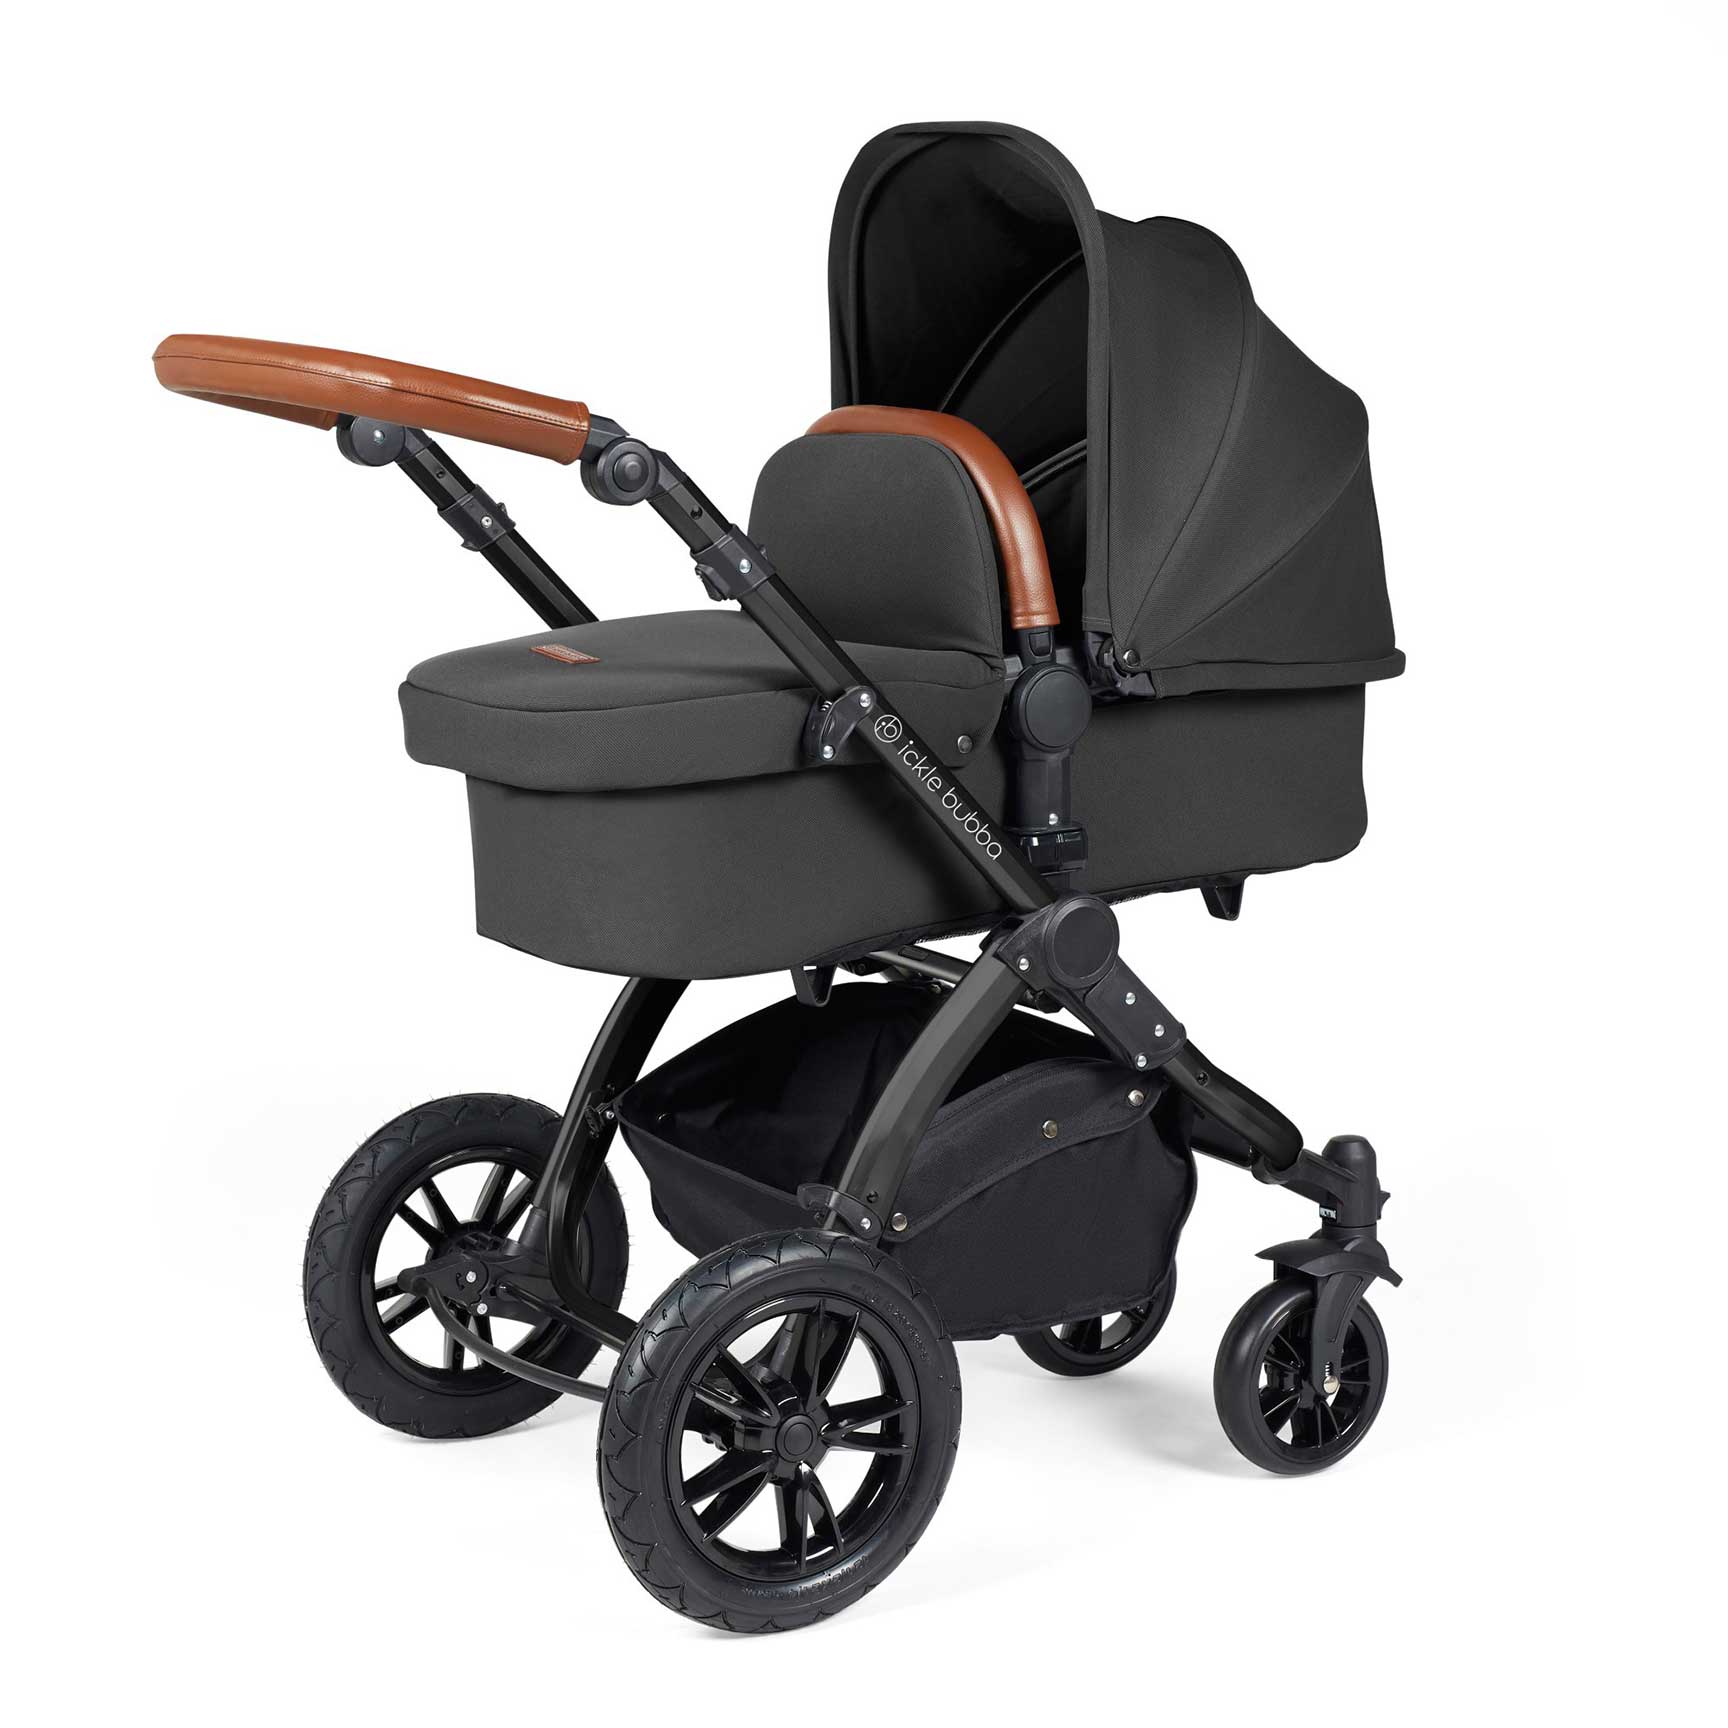 Ickle Bubba travel systems Ickle Bubba Stomp Luxe All-in-One Travel System with Isofix Base - Black/Charcoal Grey/Tan 10-011-300-207